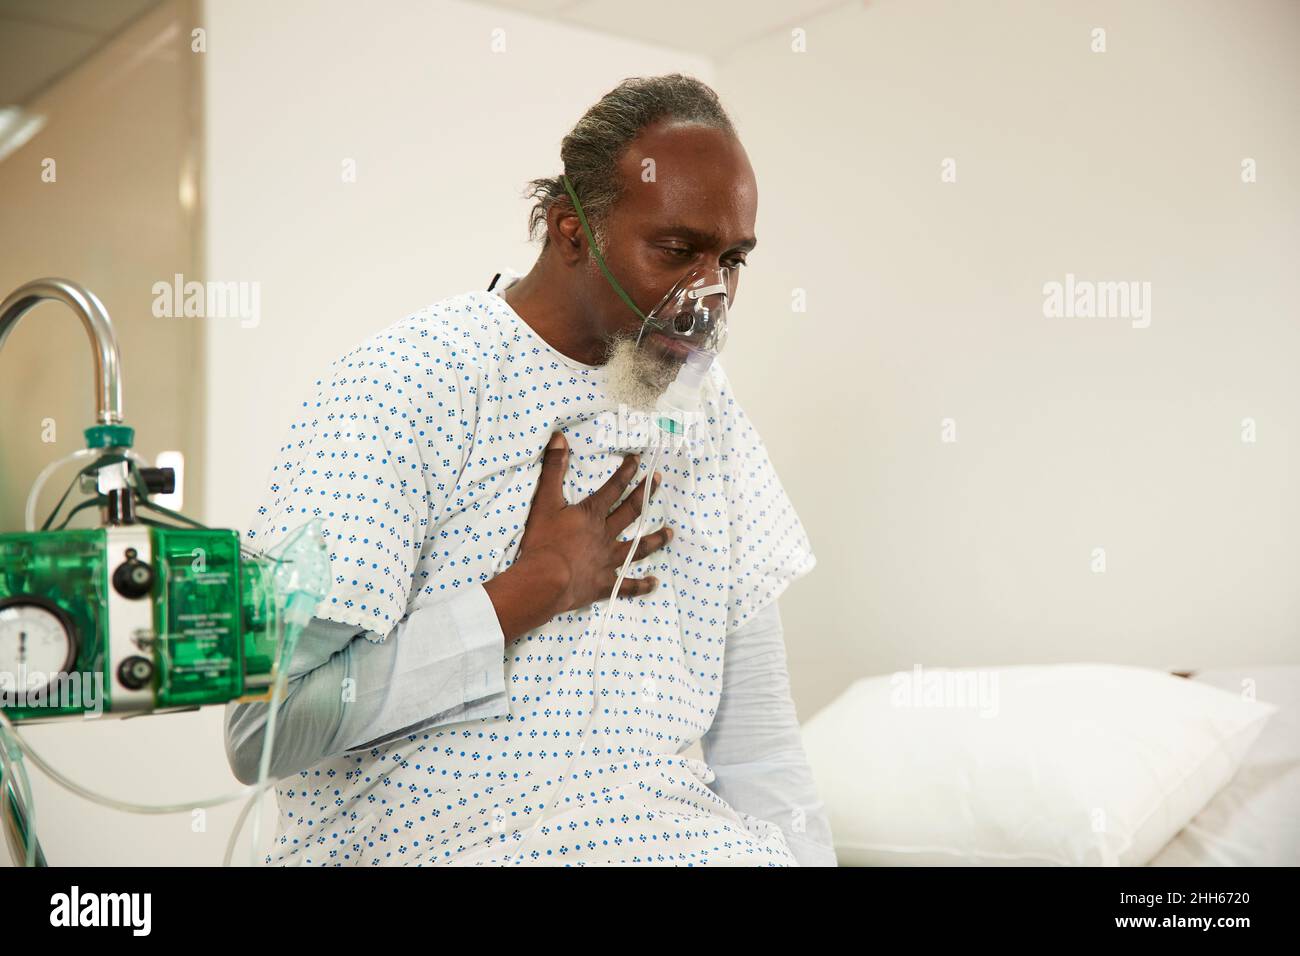 Patient touching chest wearing oxygen mask in medical room Stock Photo